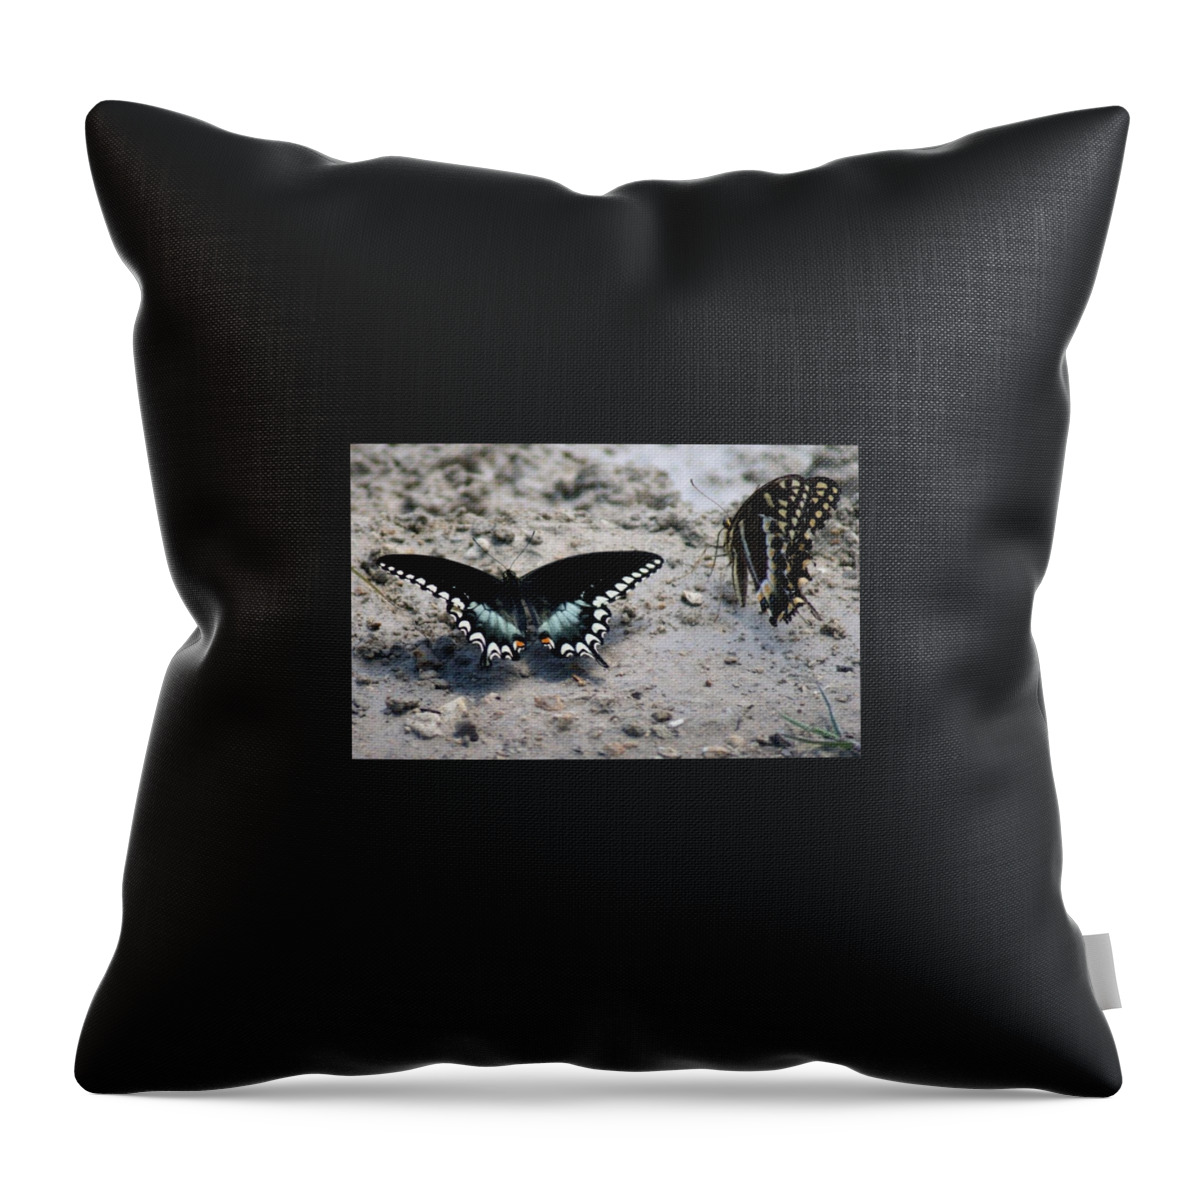 Florida Throw Pillow featuring the photograph Butterfly Kisses by Lindsey Floyd